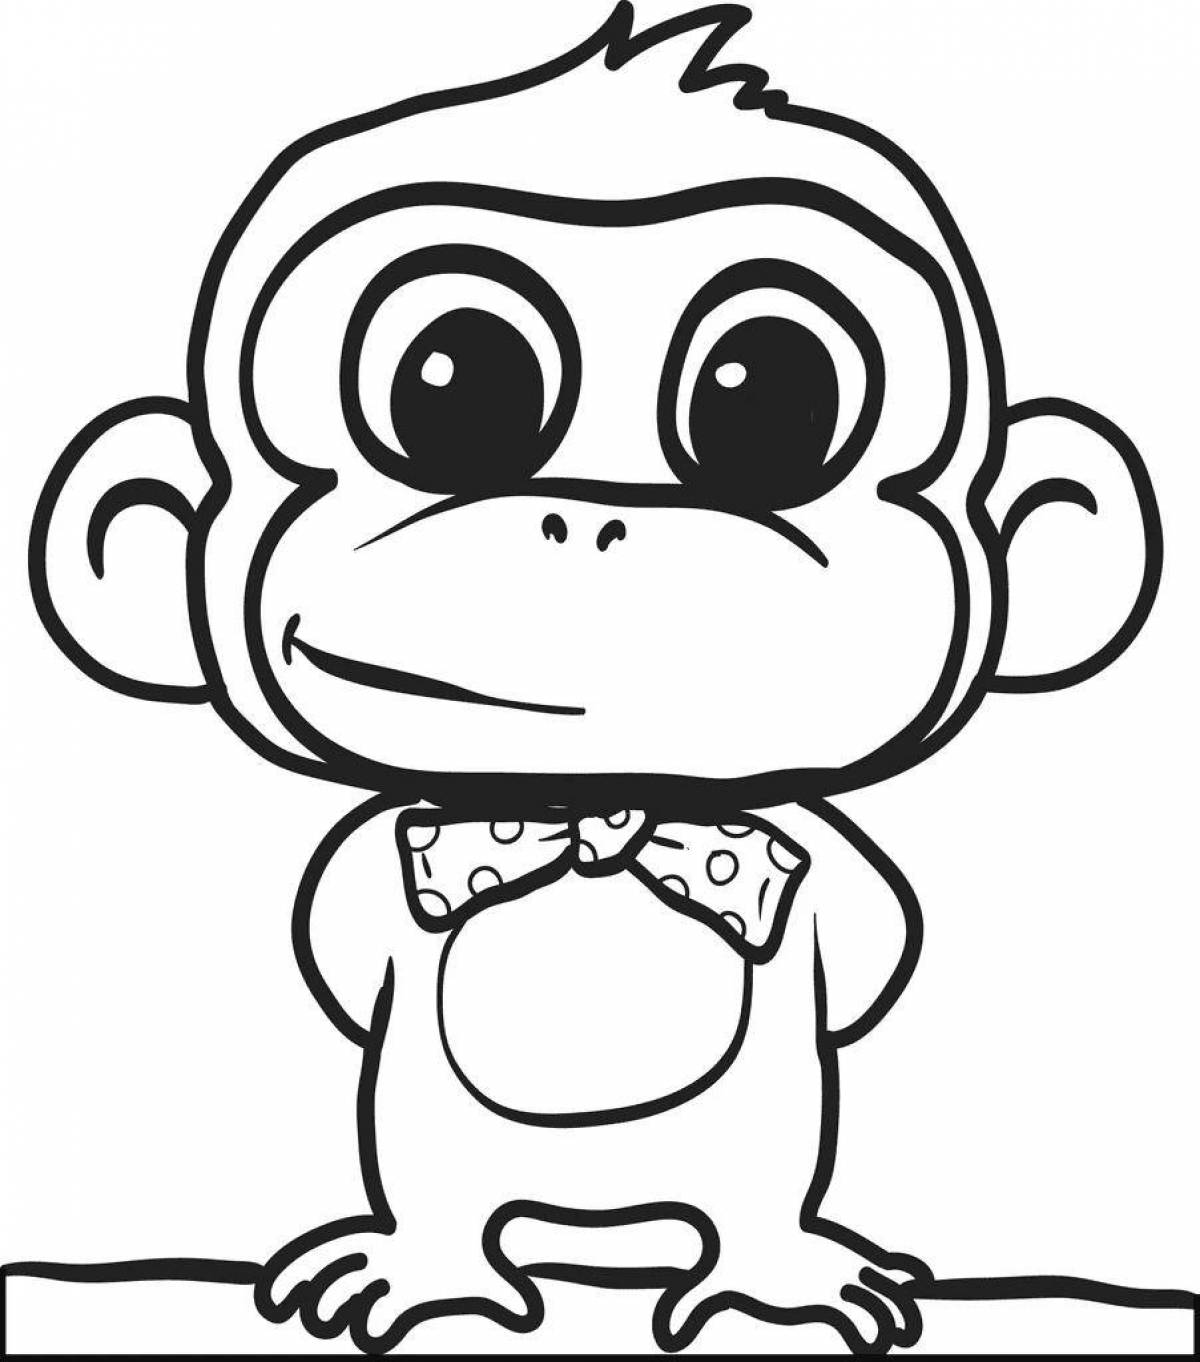 Naughty monkey coloring book